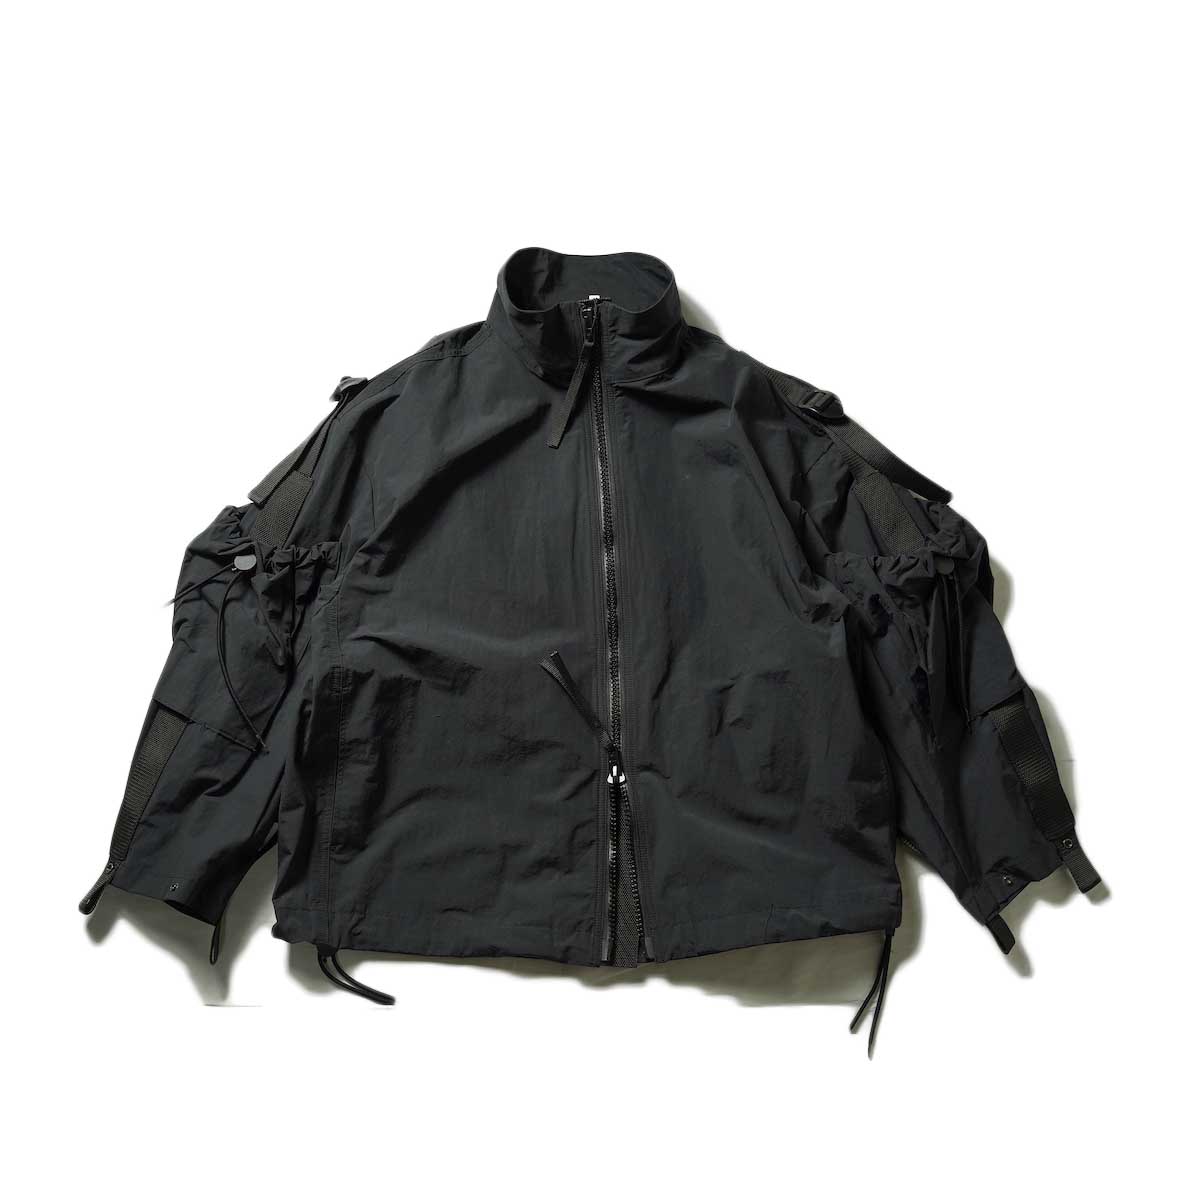 N.HOOLYWOOD / 9231-BL01-003 pieces Military Jacket (BLACK)正面